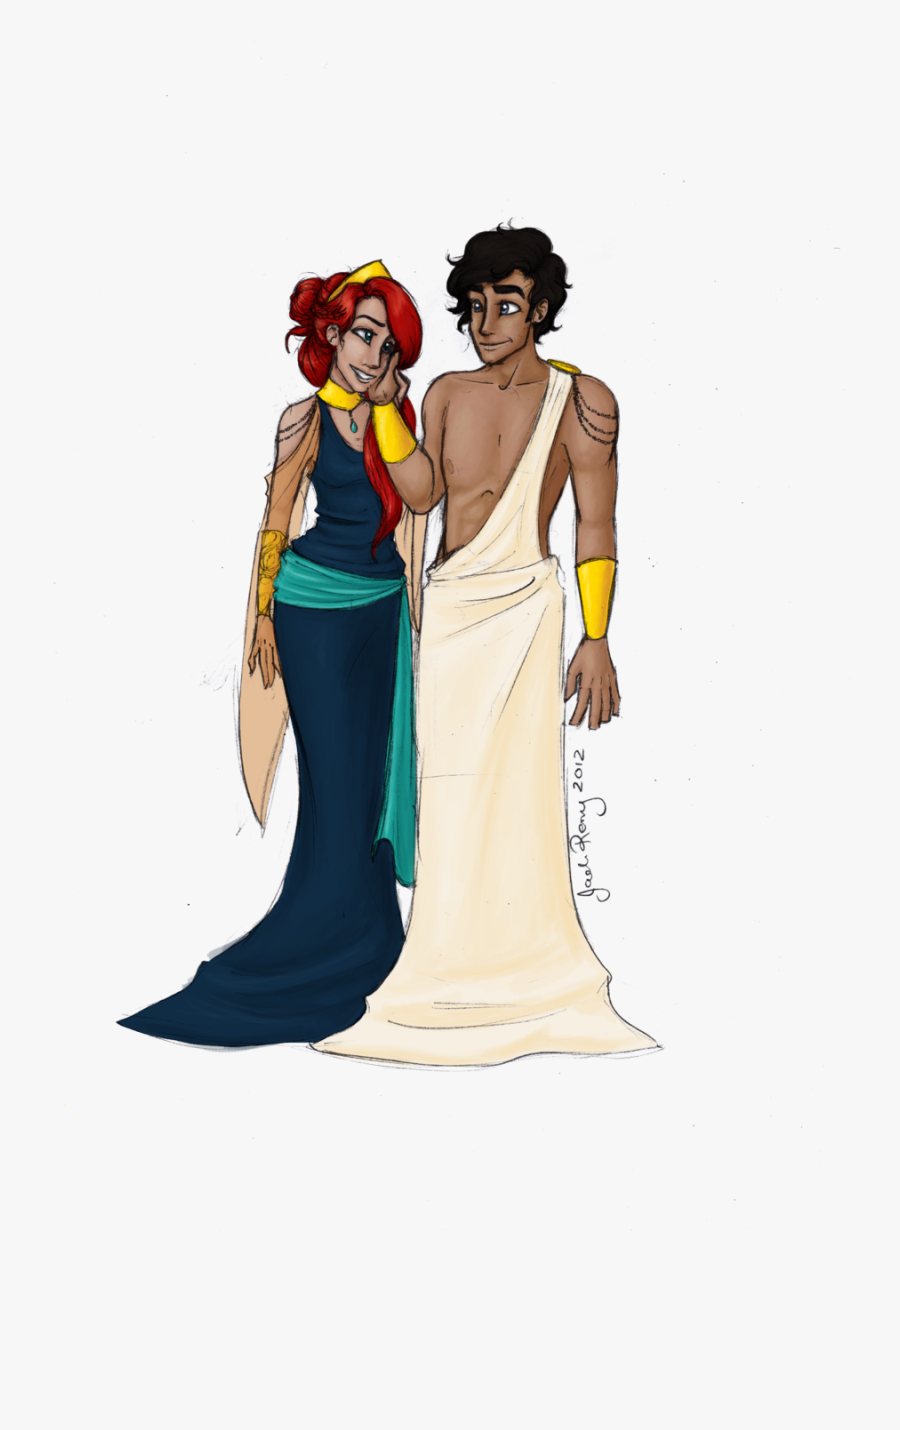 Mythical Clipart Hades - Hera And Zeus Clipart, Transparent Clipart